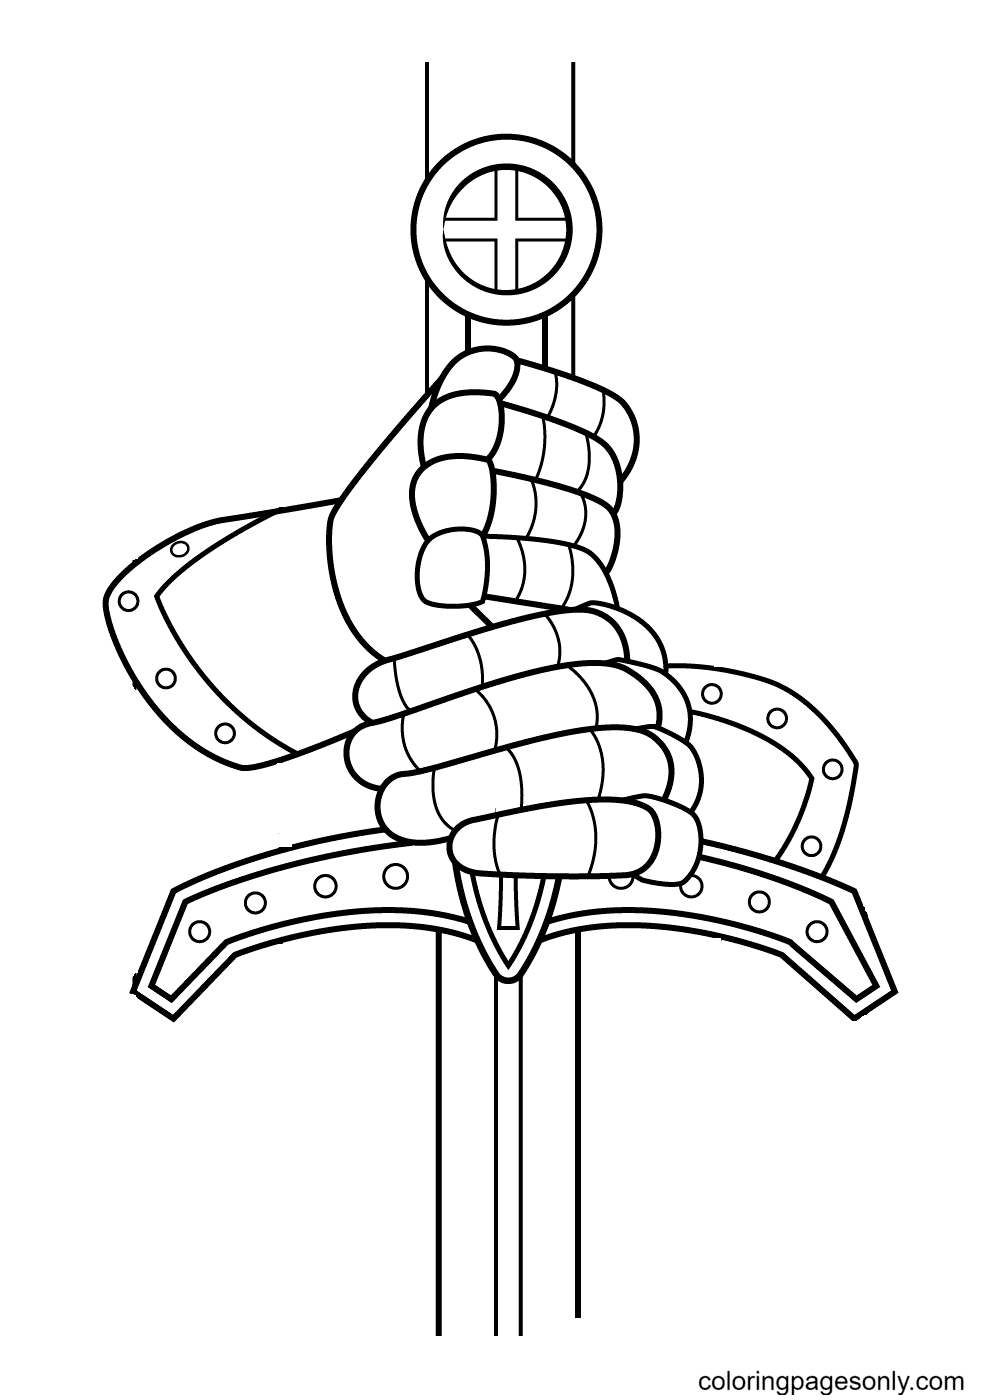 The Knight's Hand Grasps The Sword Coloring Pages